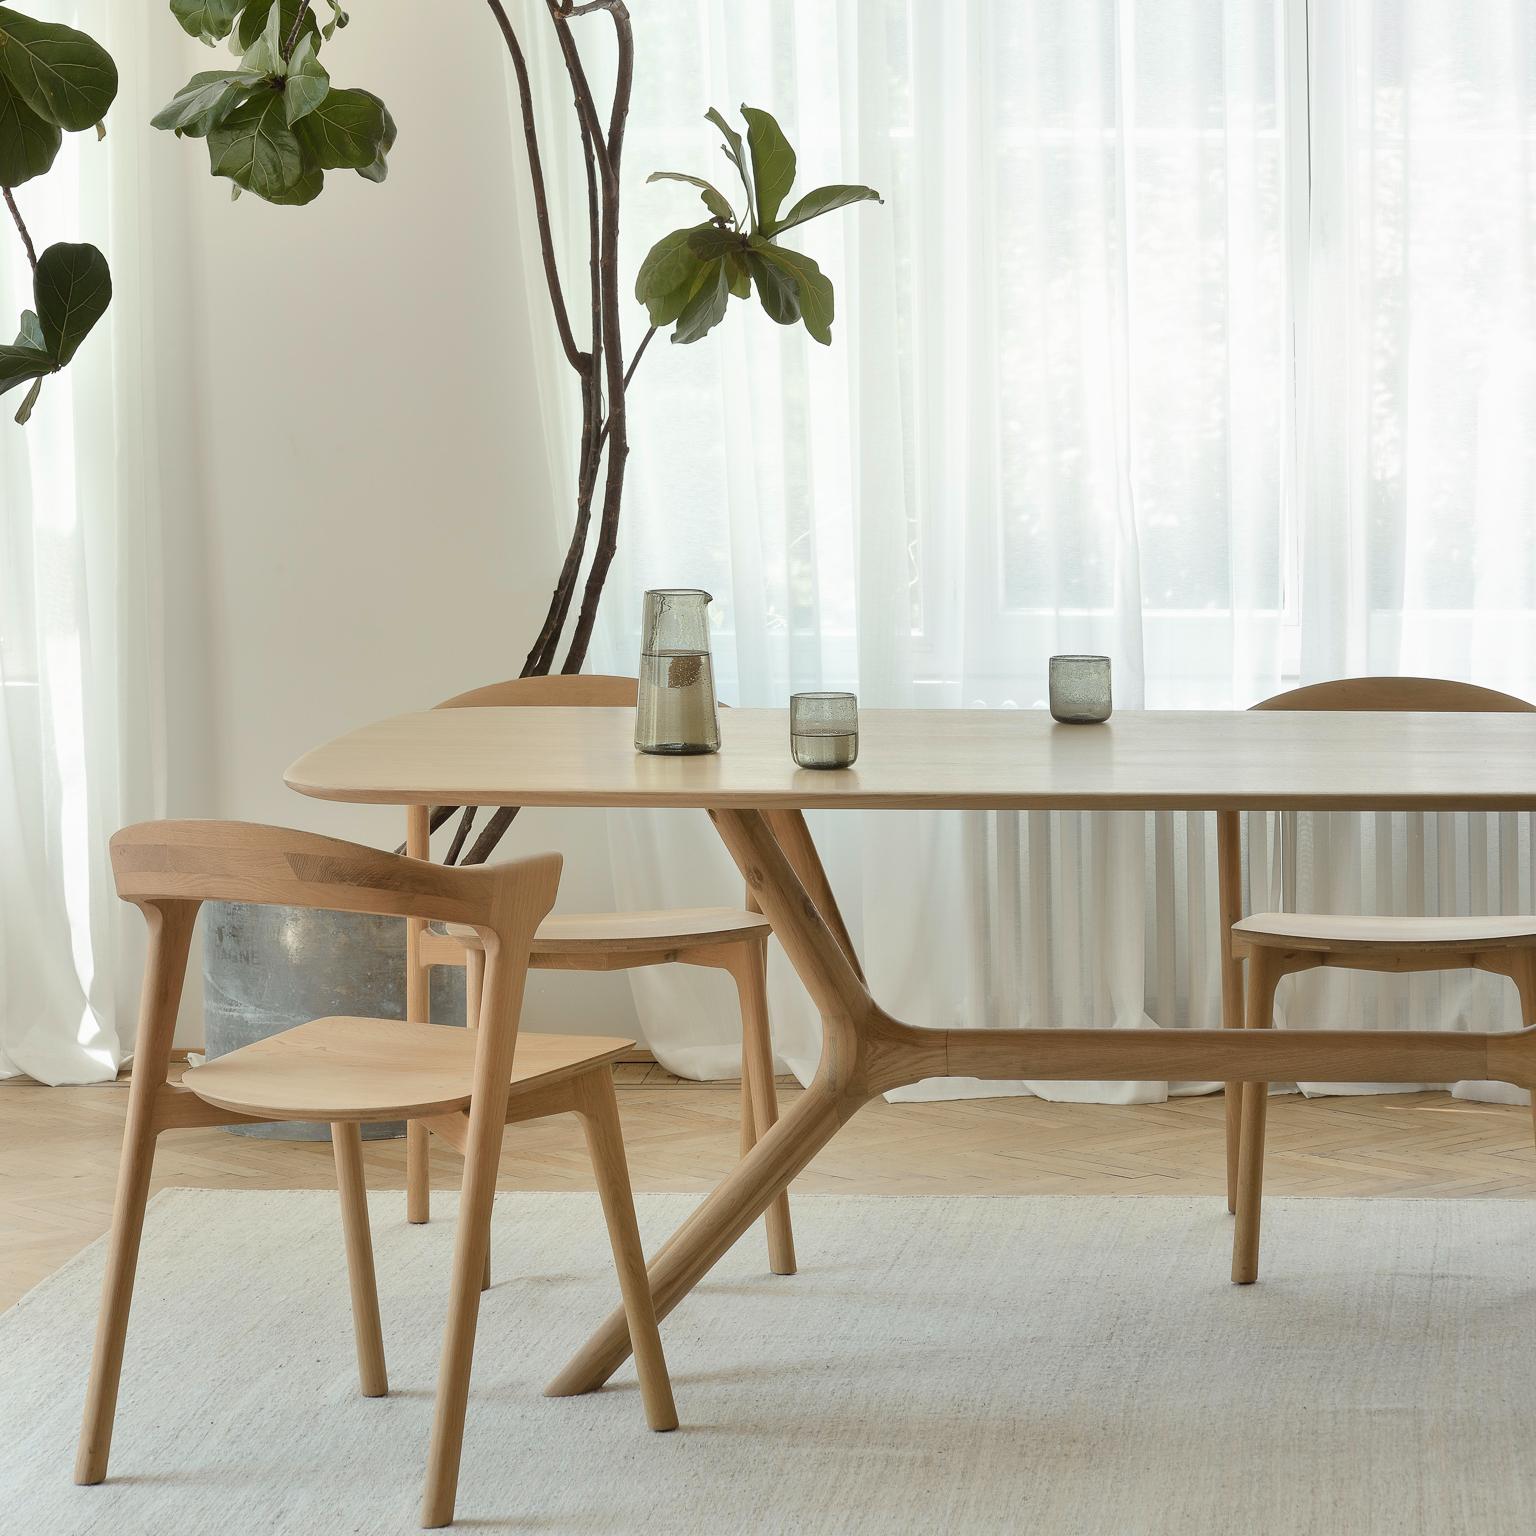 Oak X dining table with Bok dining chair | Live Light